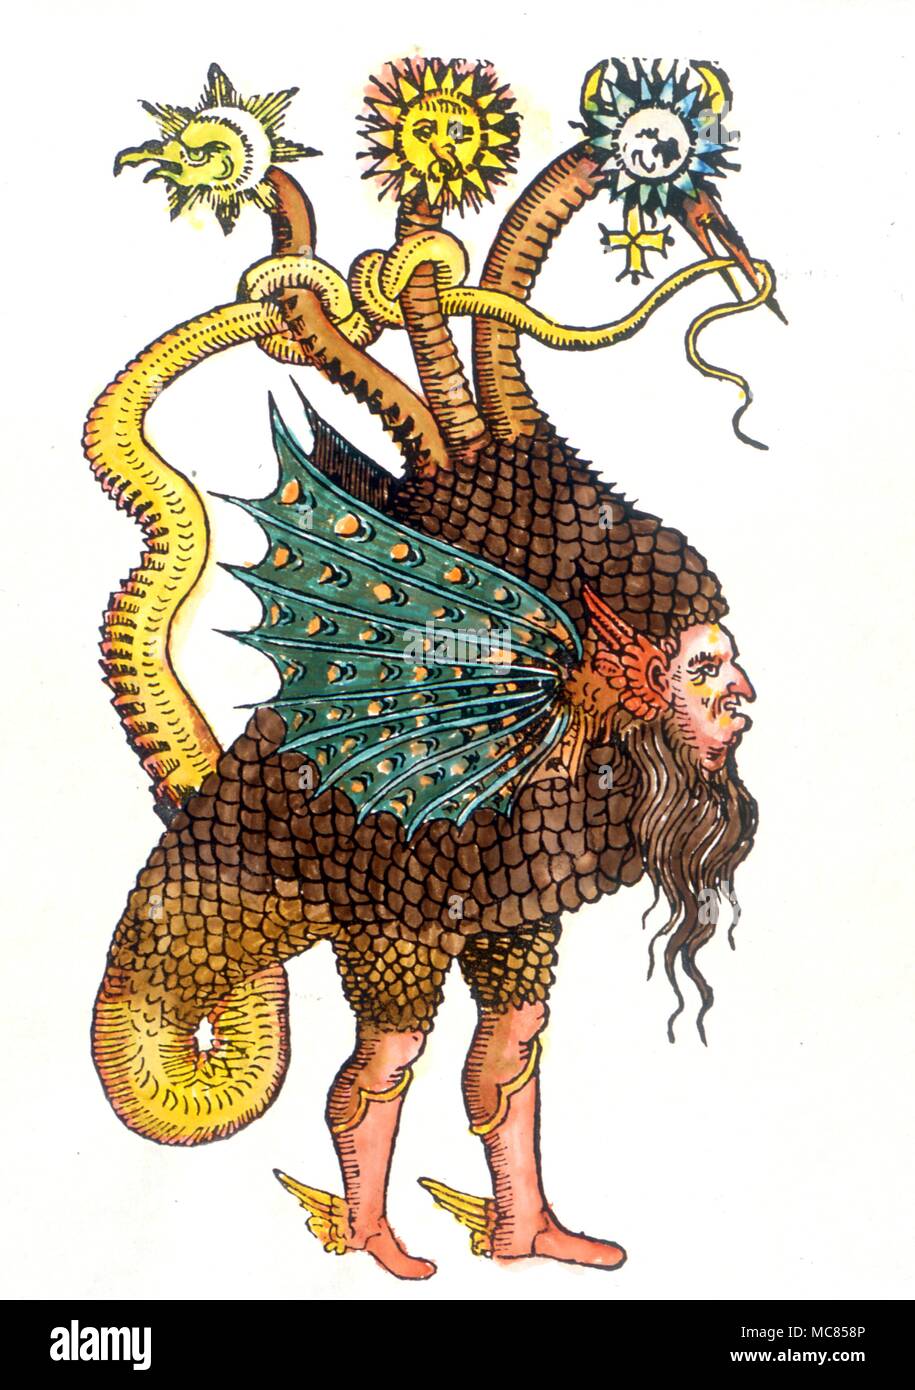 Astrology The three headed monster of Mercury with the solar, lunar and mercurial heads. Some occultists call this the image of Azoth but it is probably and image of the union of the Three Principles of Alchemy Salt Mercury and Sulphur Stock Photo